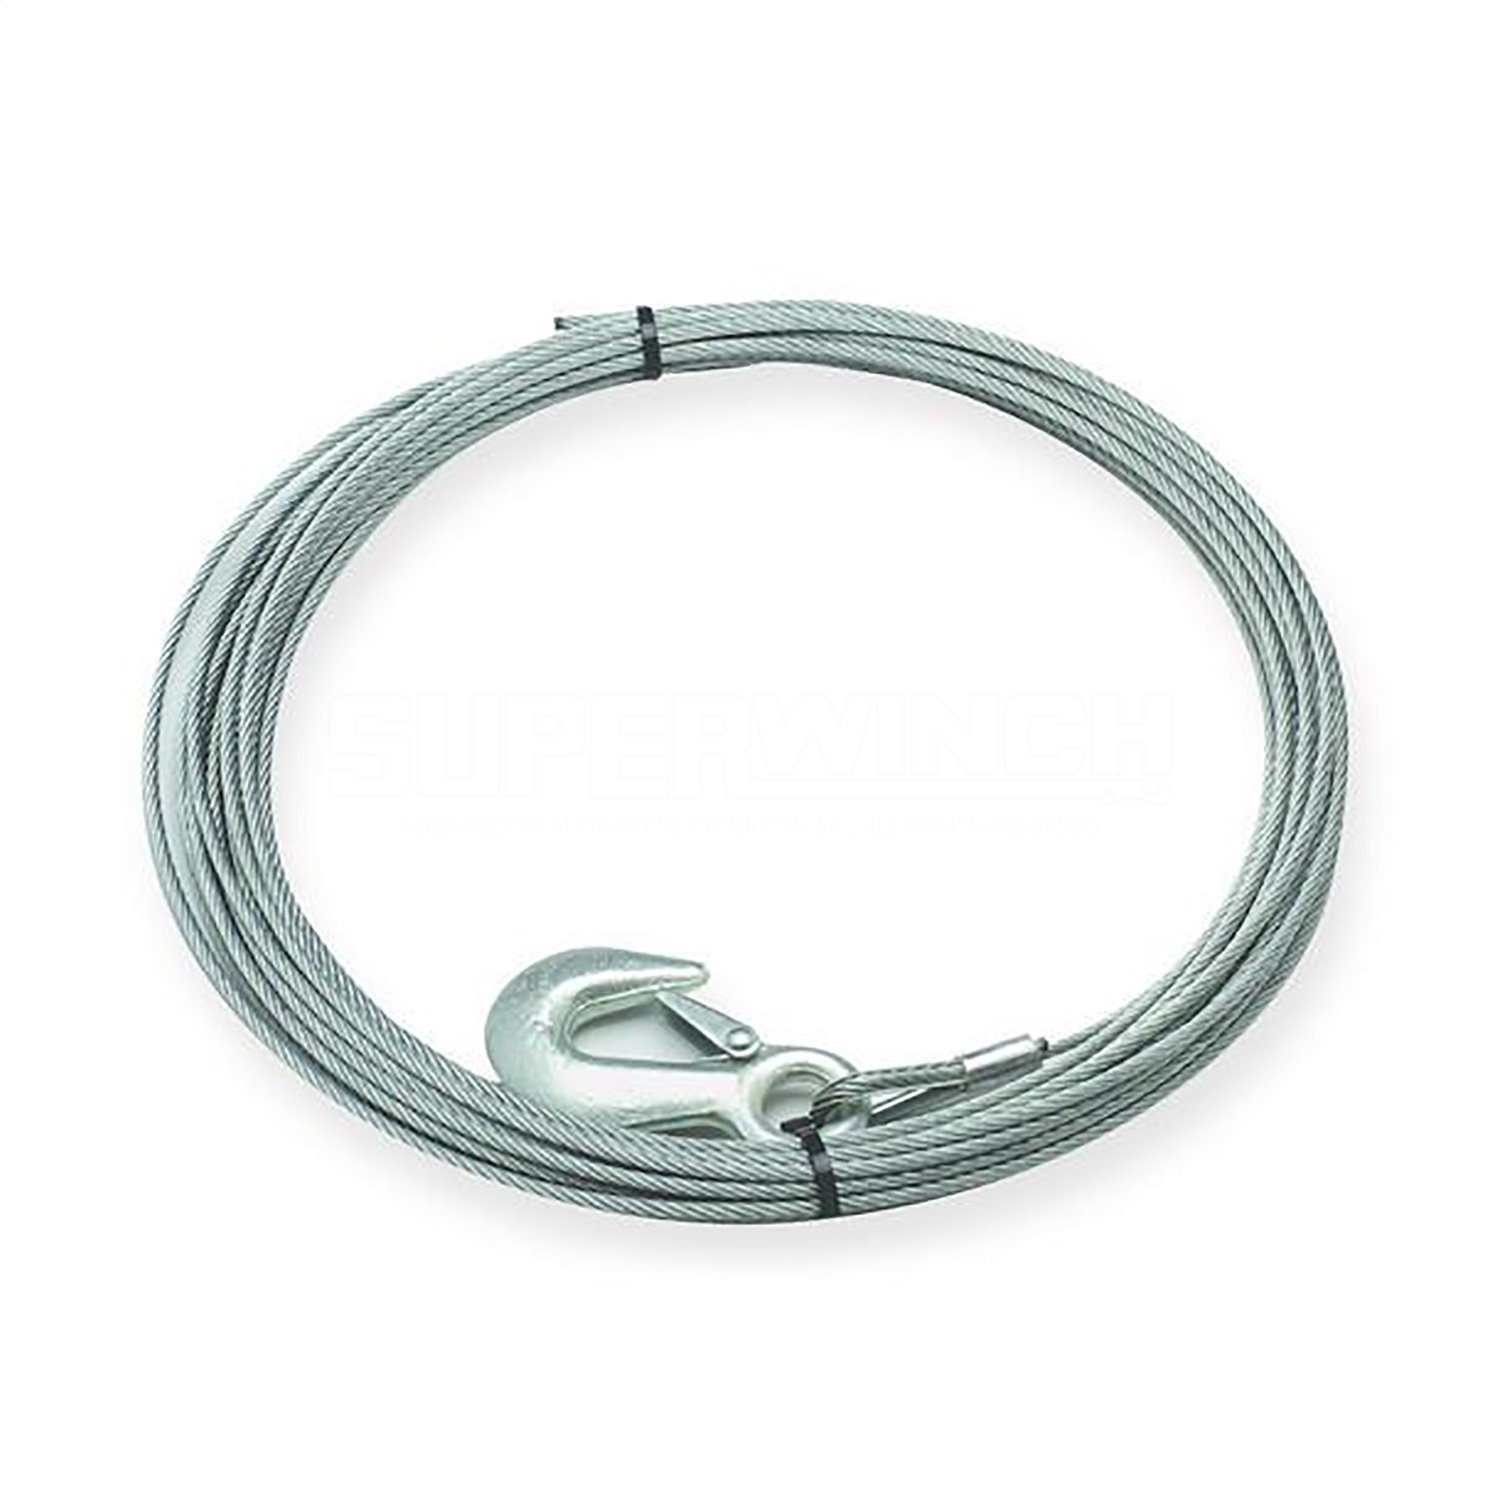 WIRE ROPE ASSY-TIGER SHARK 11500 RP